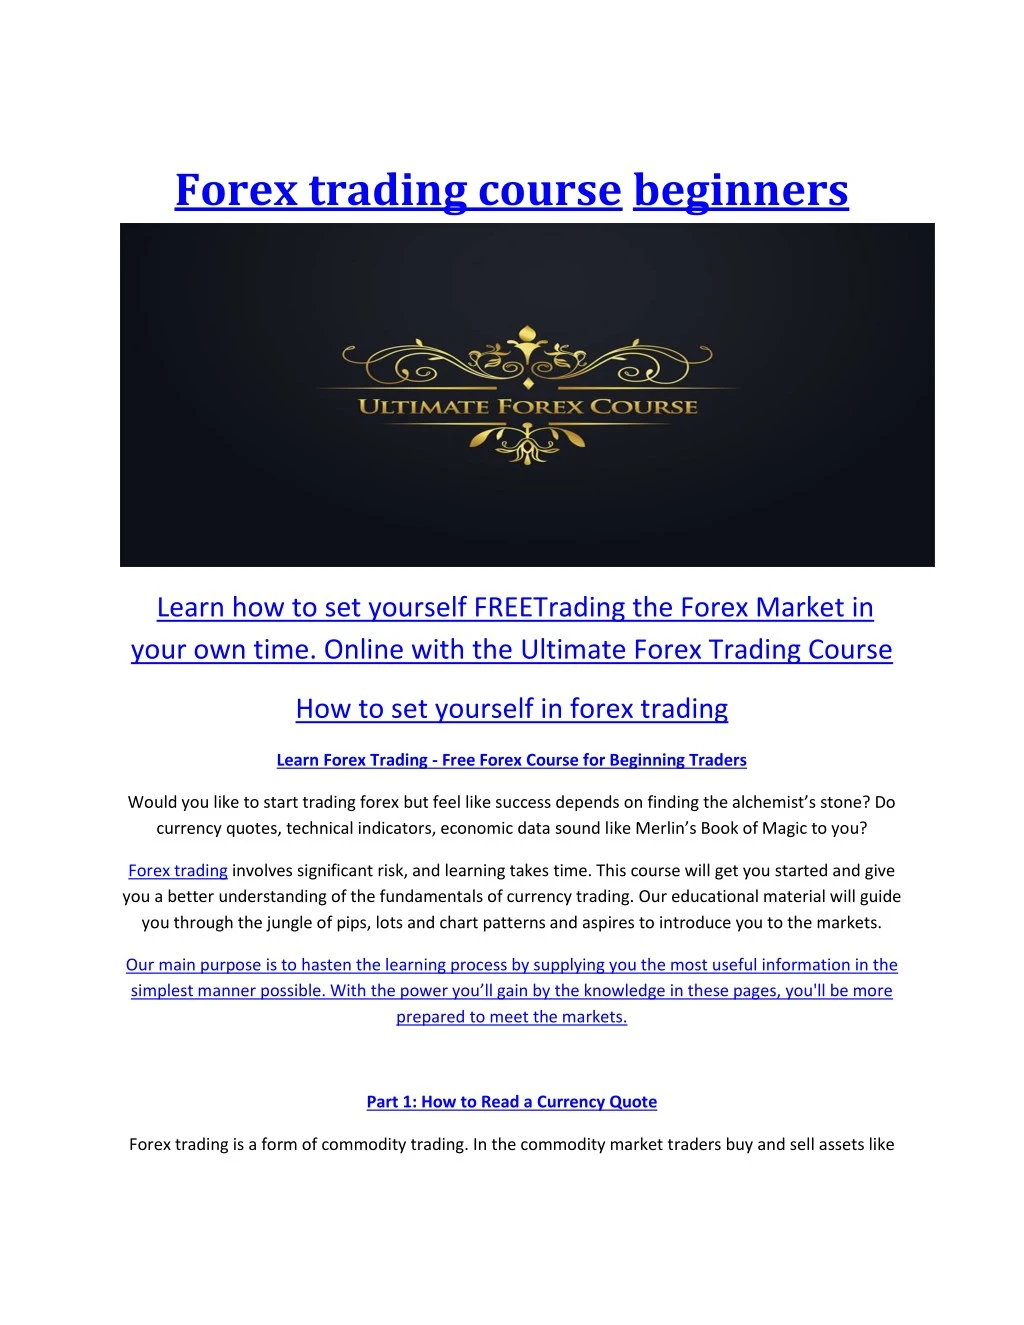 Forex trading for beginners ppt